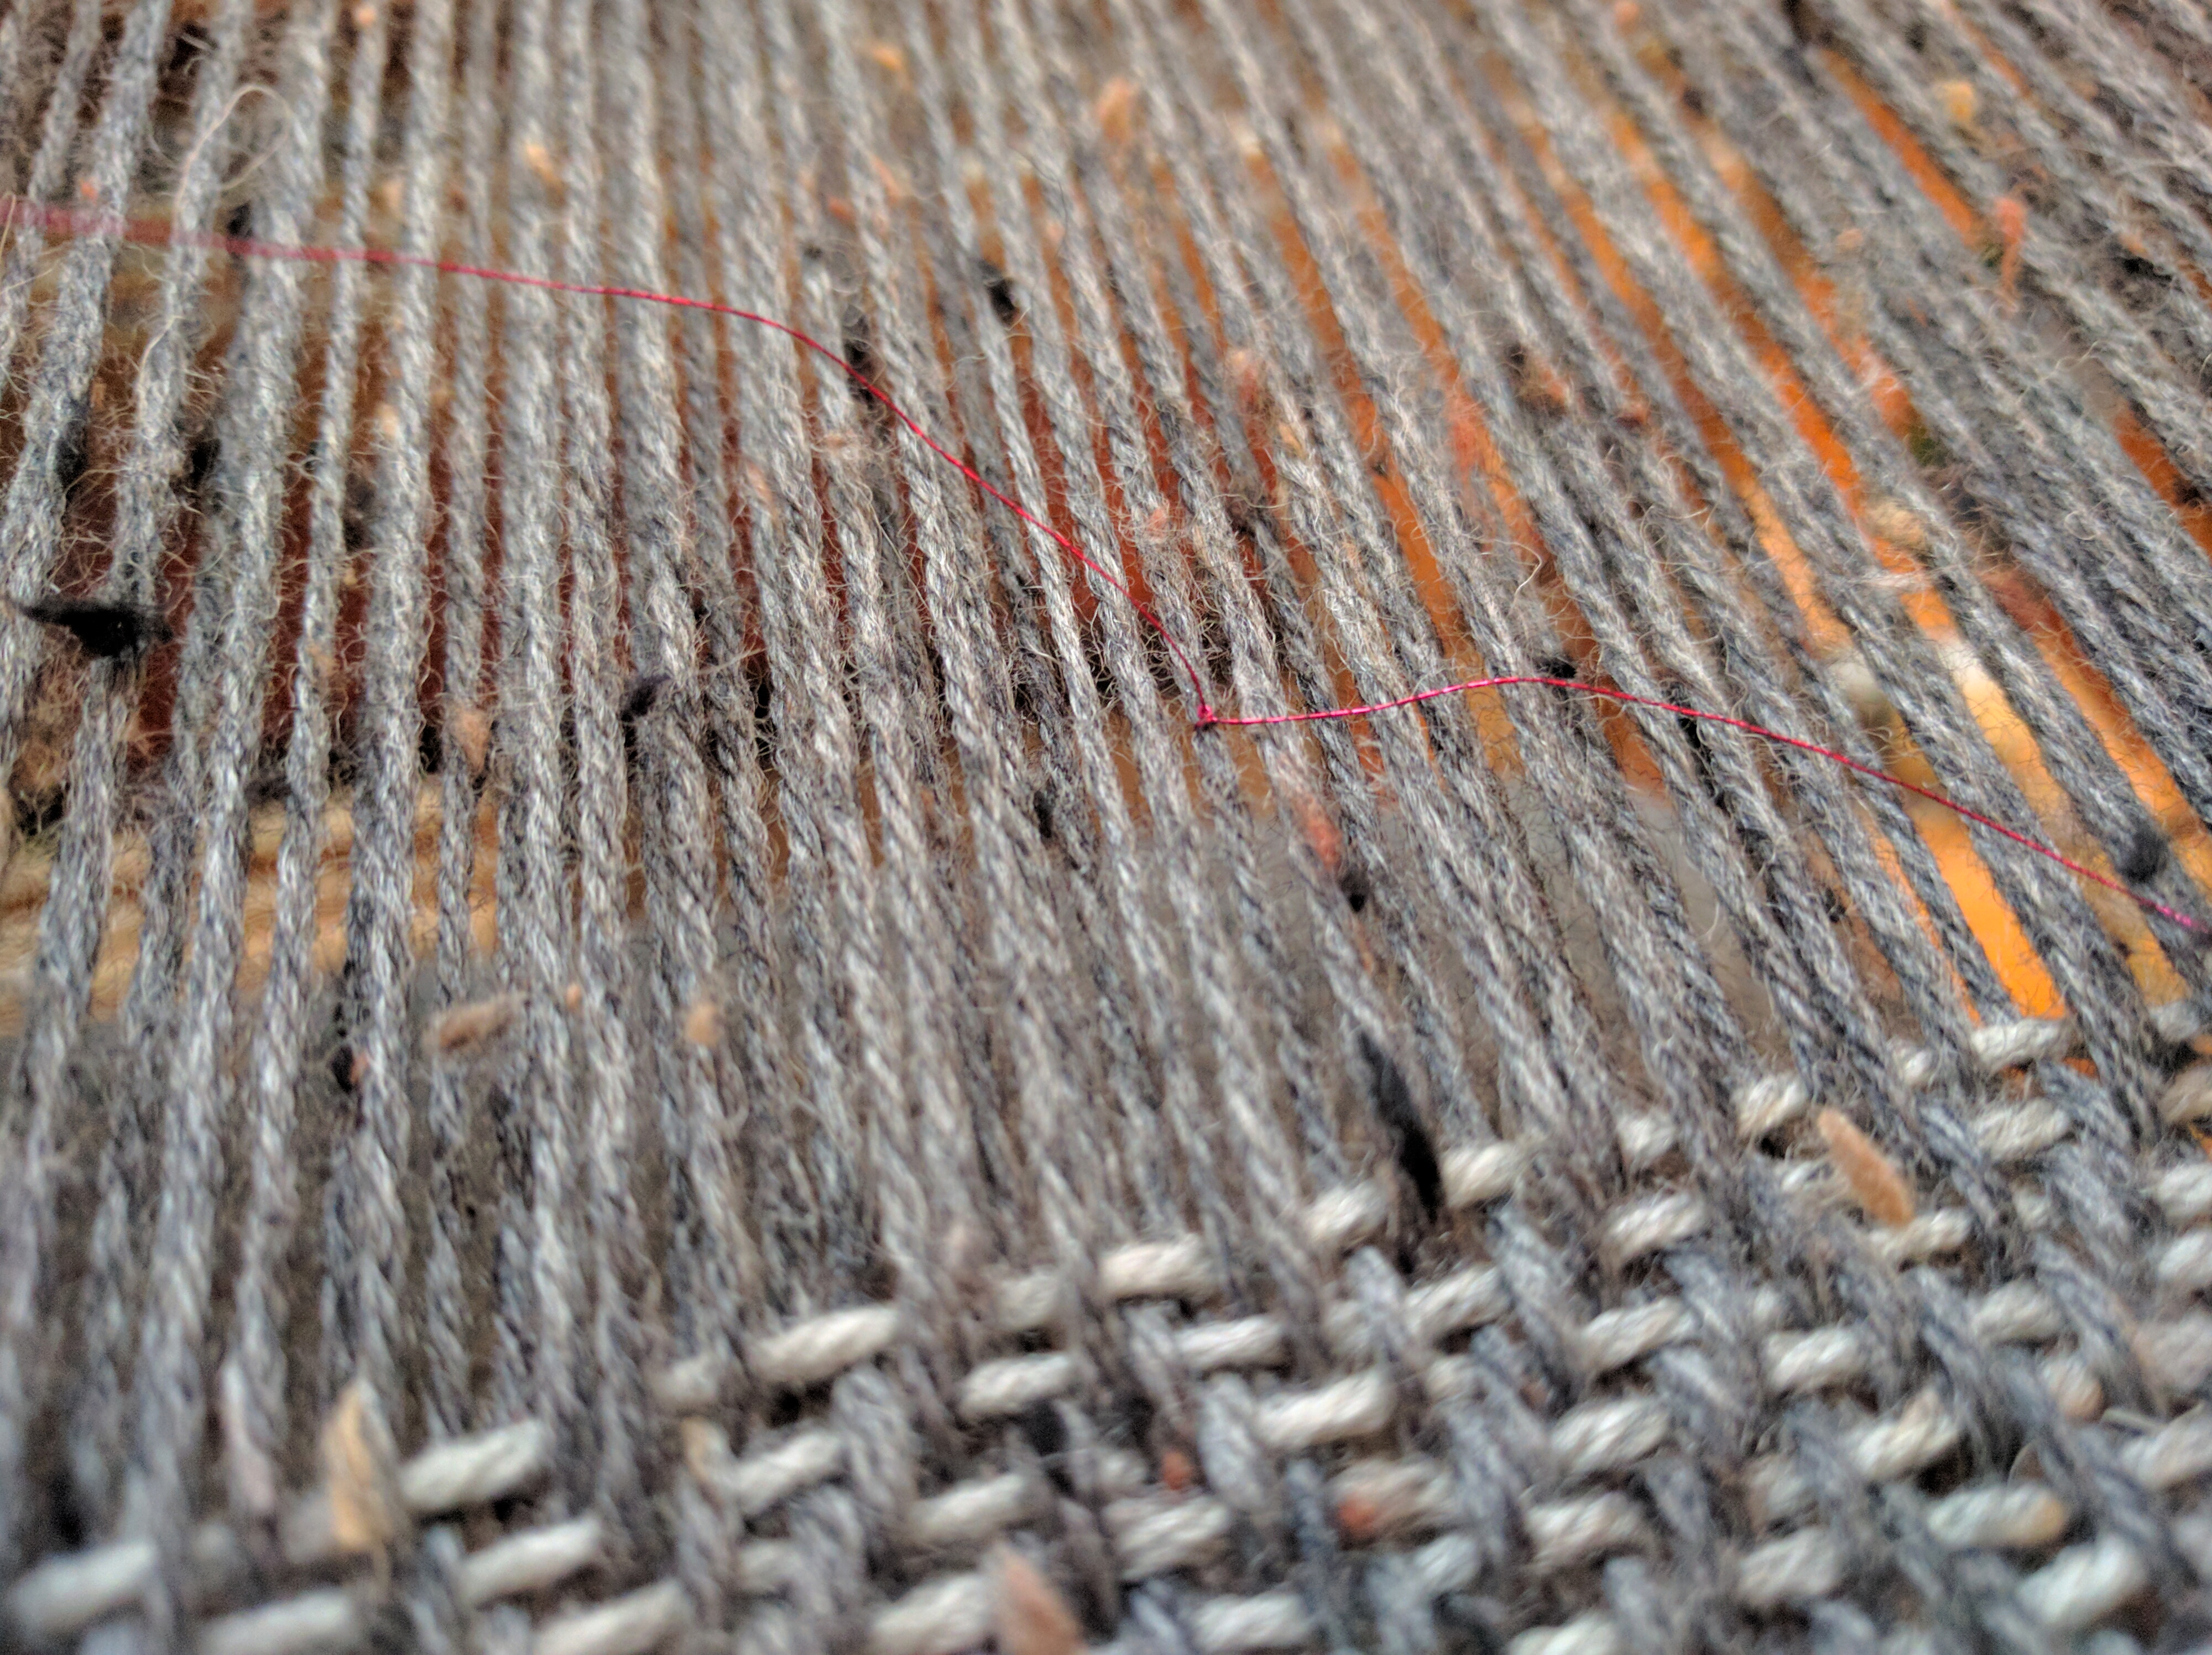 This contrasting thread tied to the some of the warp threads lets me know I'm at the halfway point.